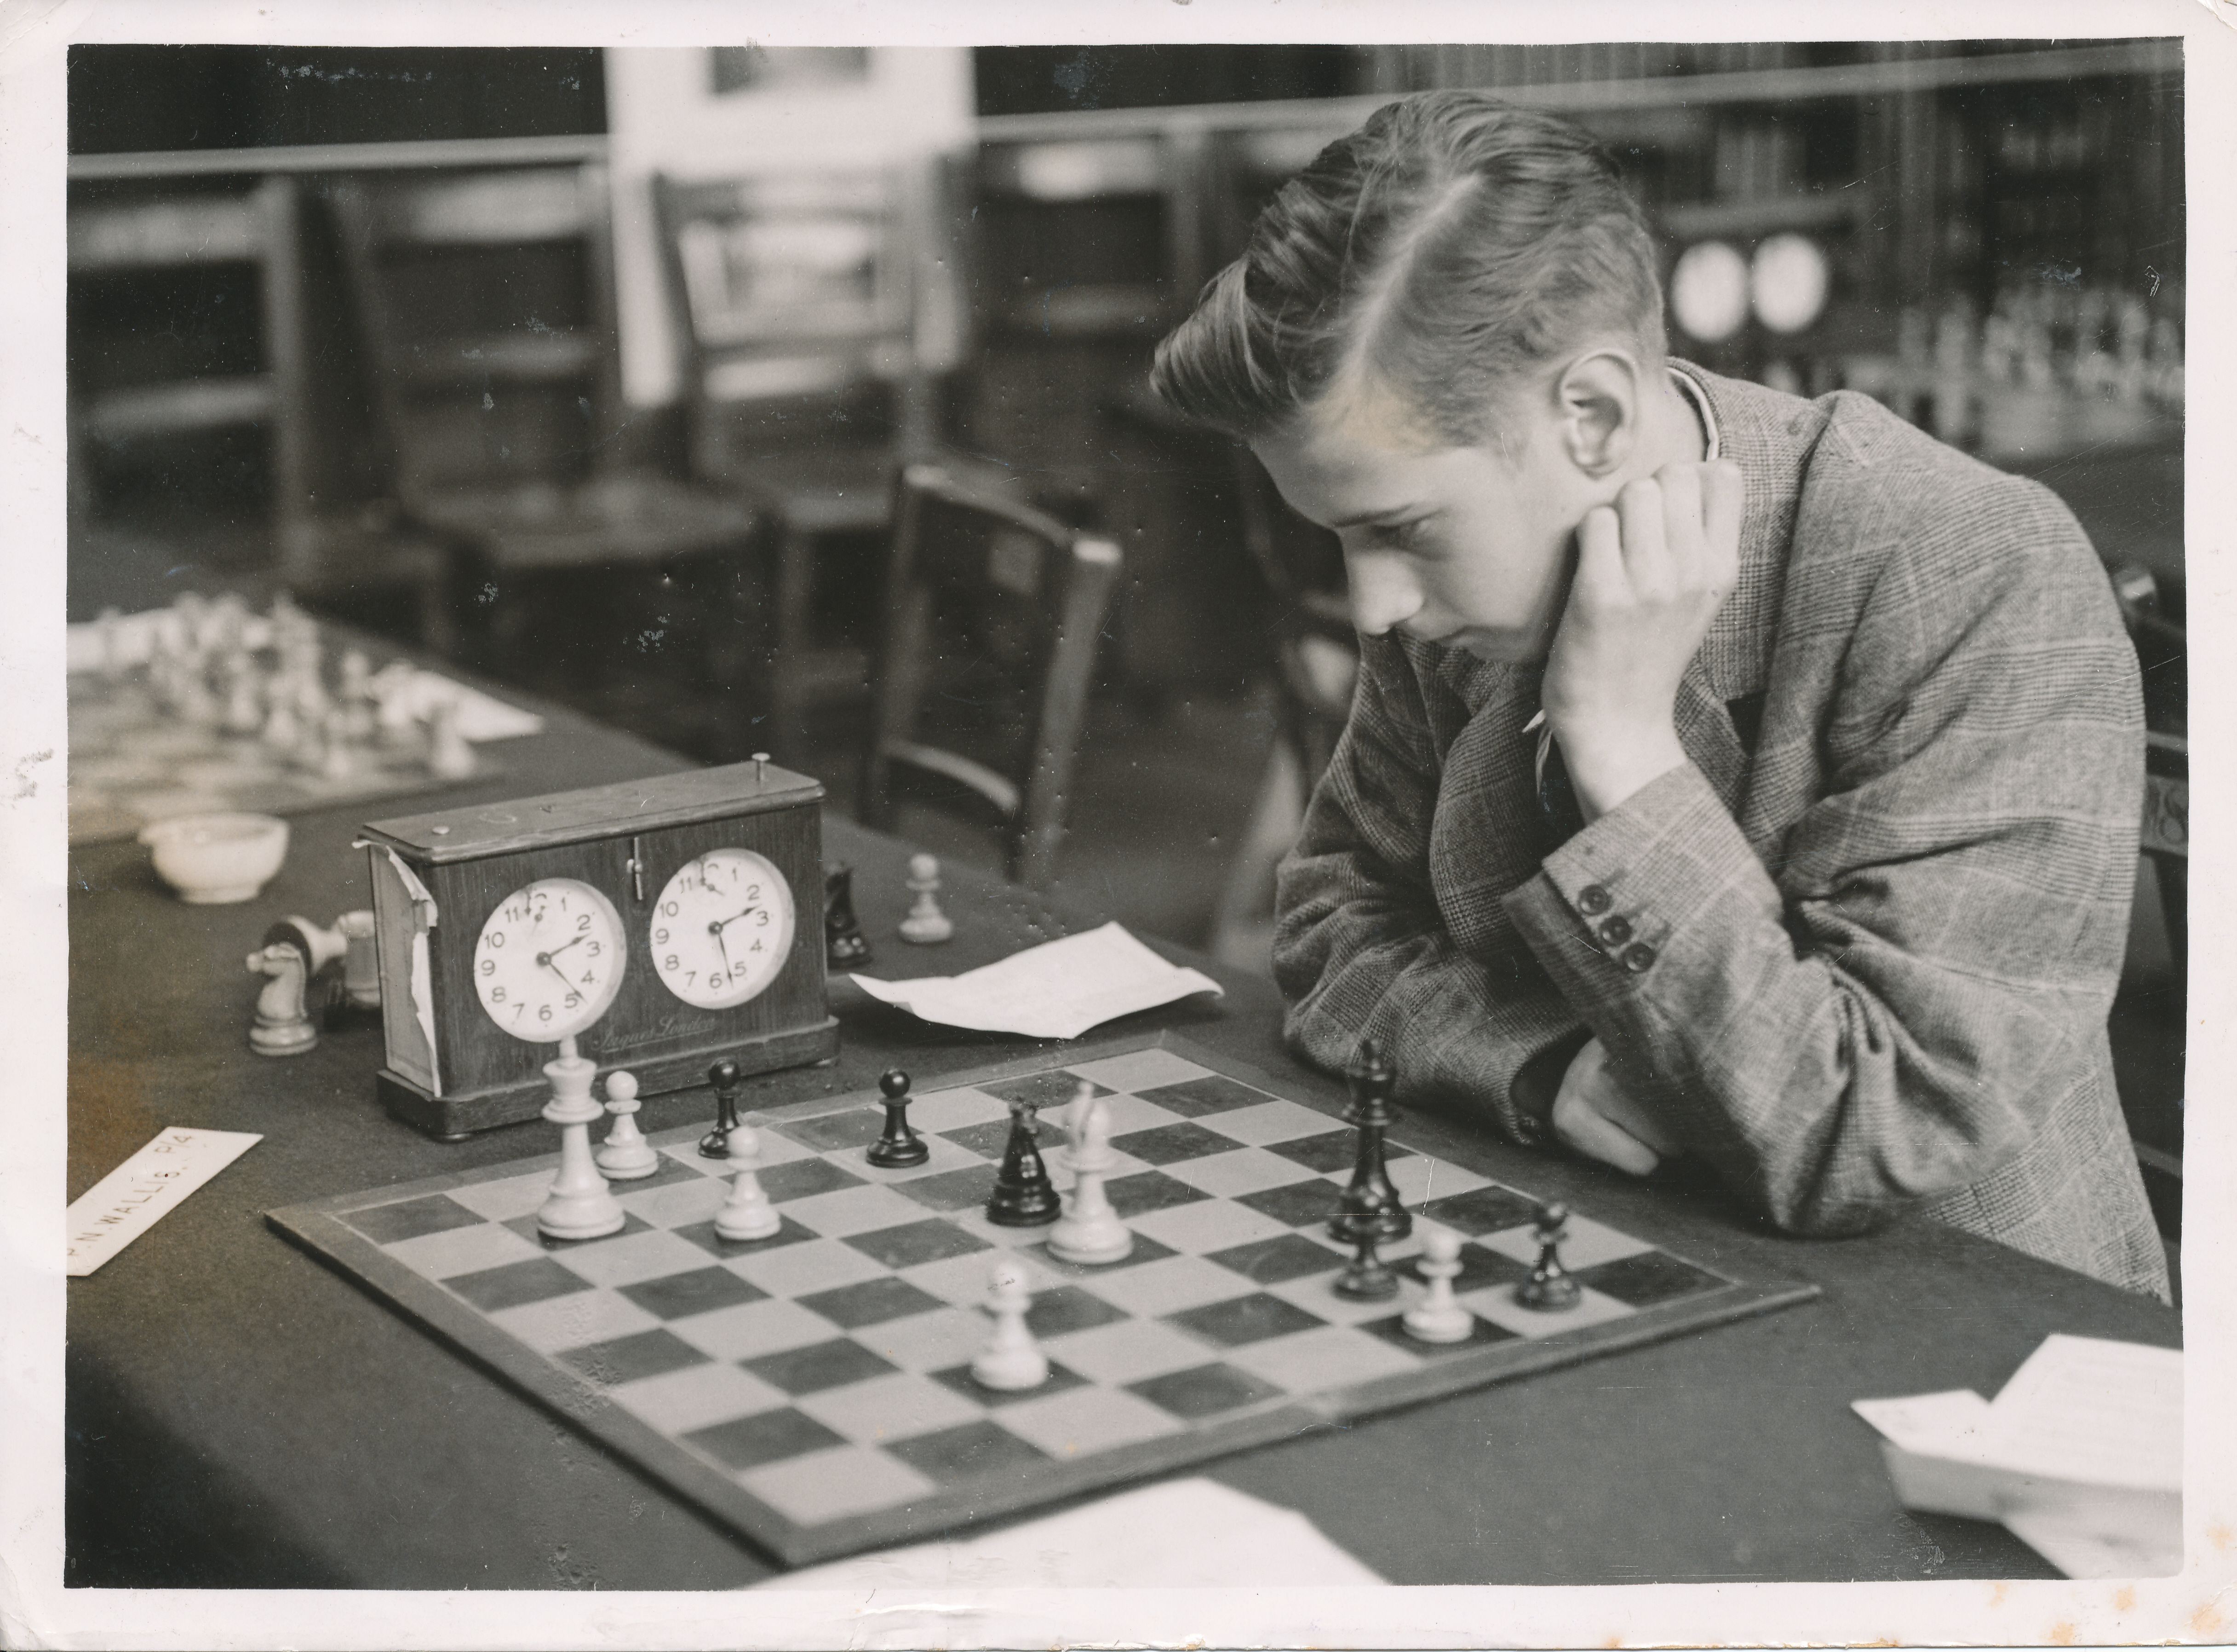 Boy Chess Champion. New York Times photo shows 14 year old J. Penrose 14 year old by chess champion of Britain, in play at the British Chess Championships at Bishopsgate Institute today. He has had great success in the tournament so far, beating men far above his age and experience. 2nd September 1948. Photograph by Reginald Webster